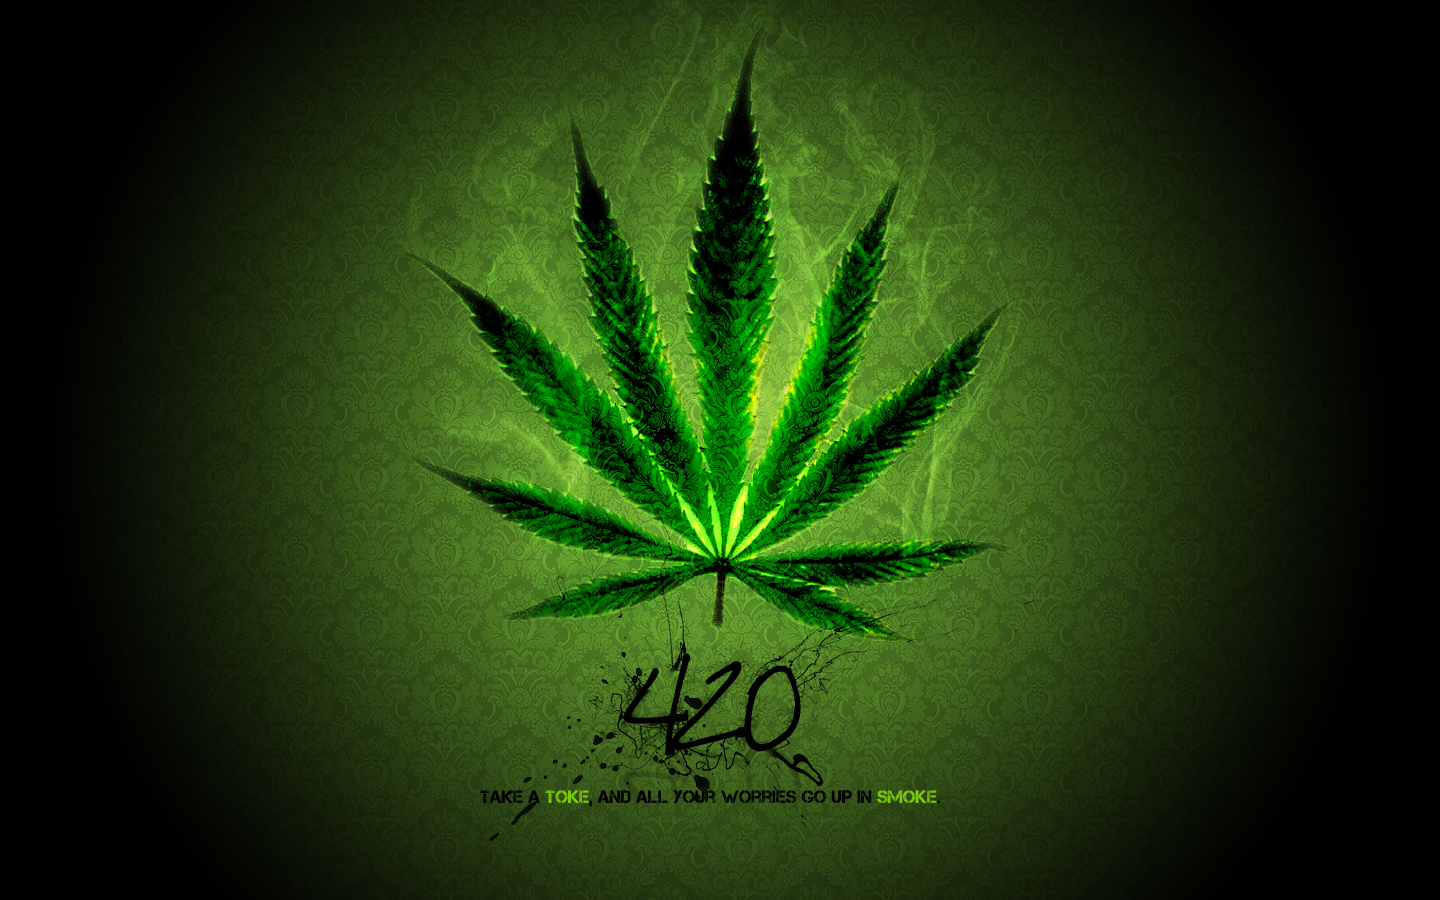 Weed Wallpapers HD Free download Wallpapers, Backgrounds, Images